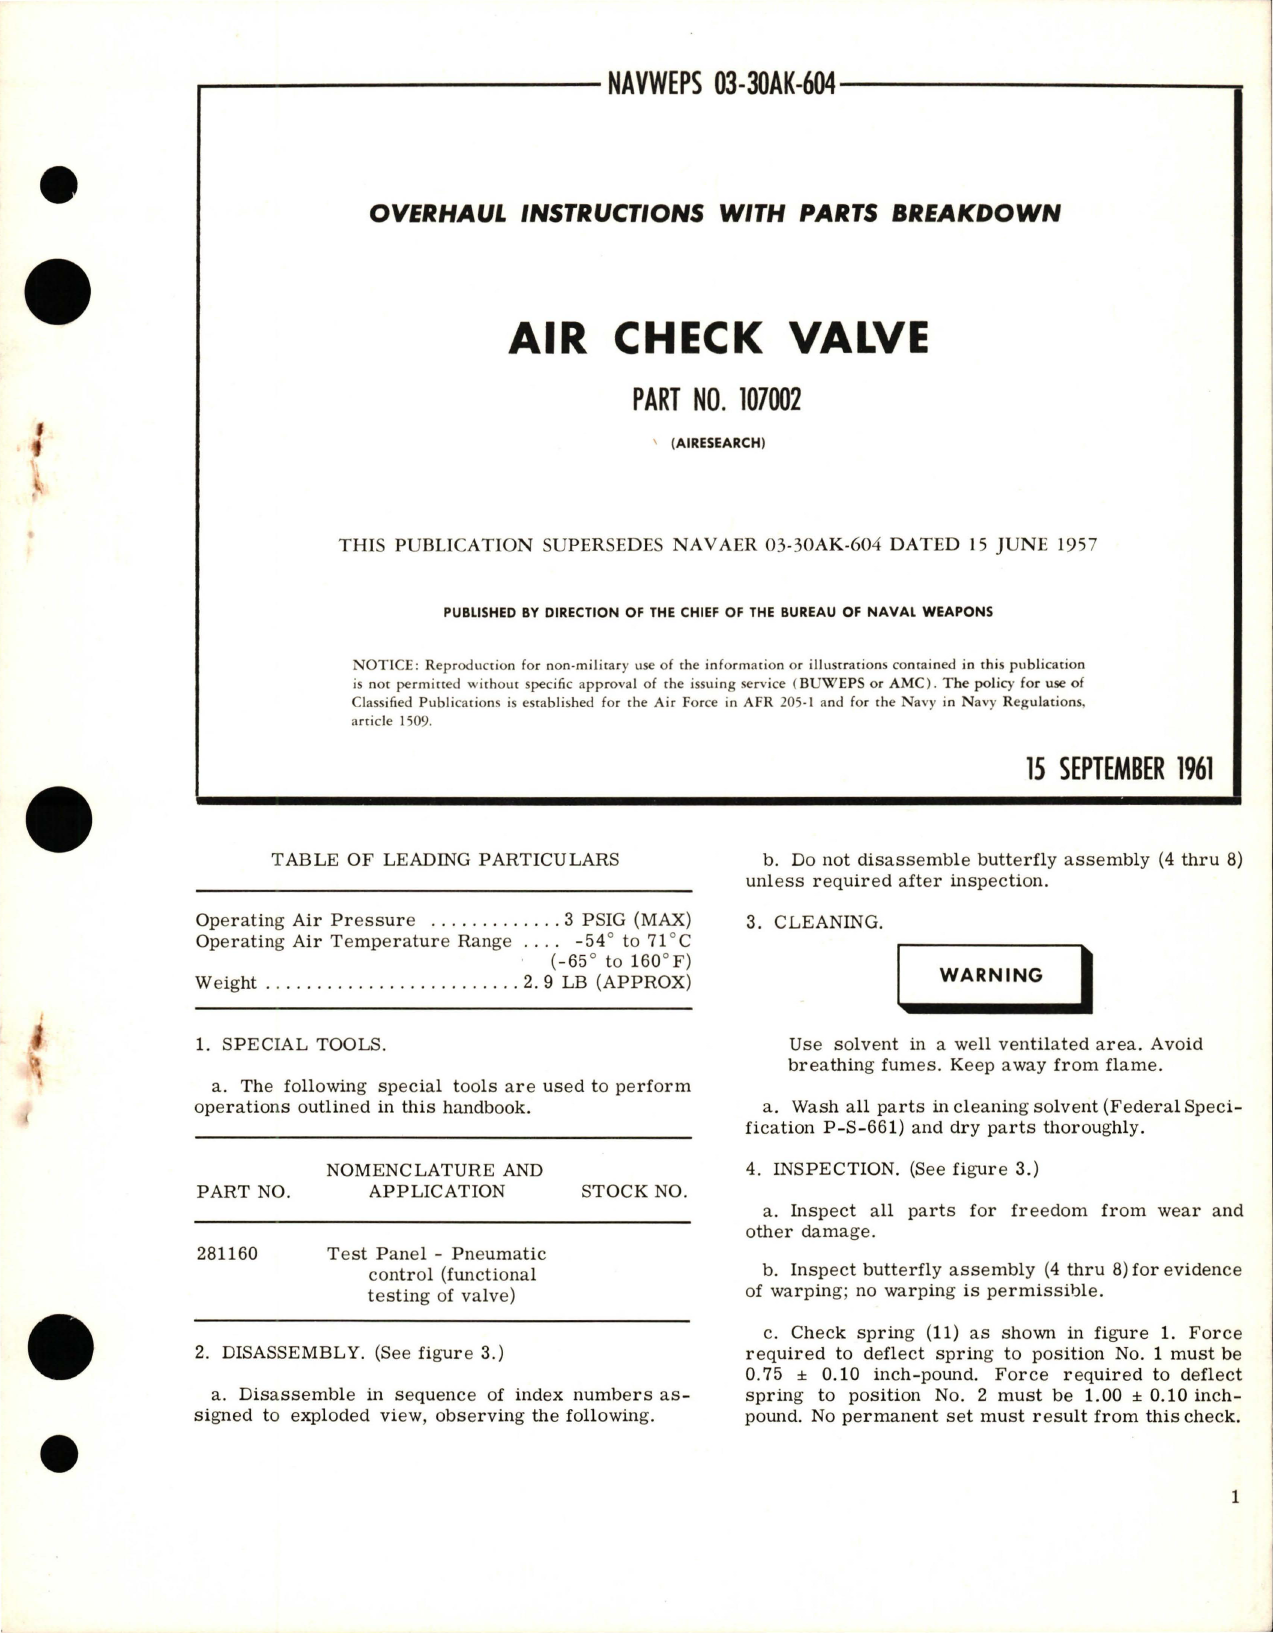 Sample page 1 from AirCorps Library document: Overhaul Instructions with Parts Breakdown for Air Check Valve - Part 107002